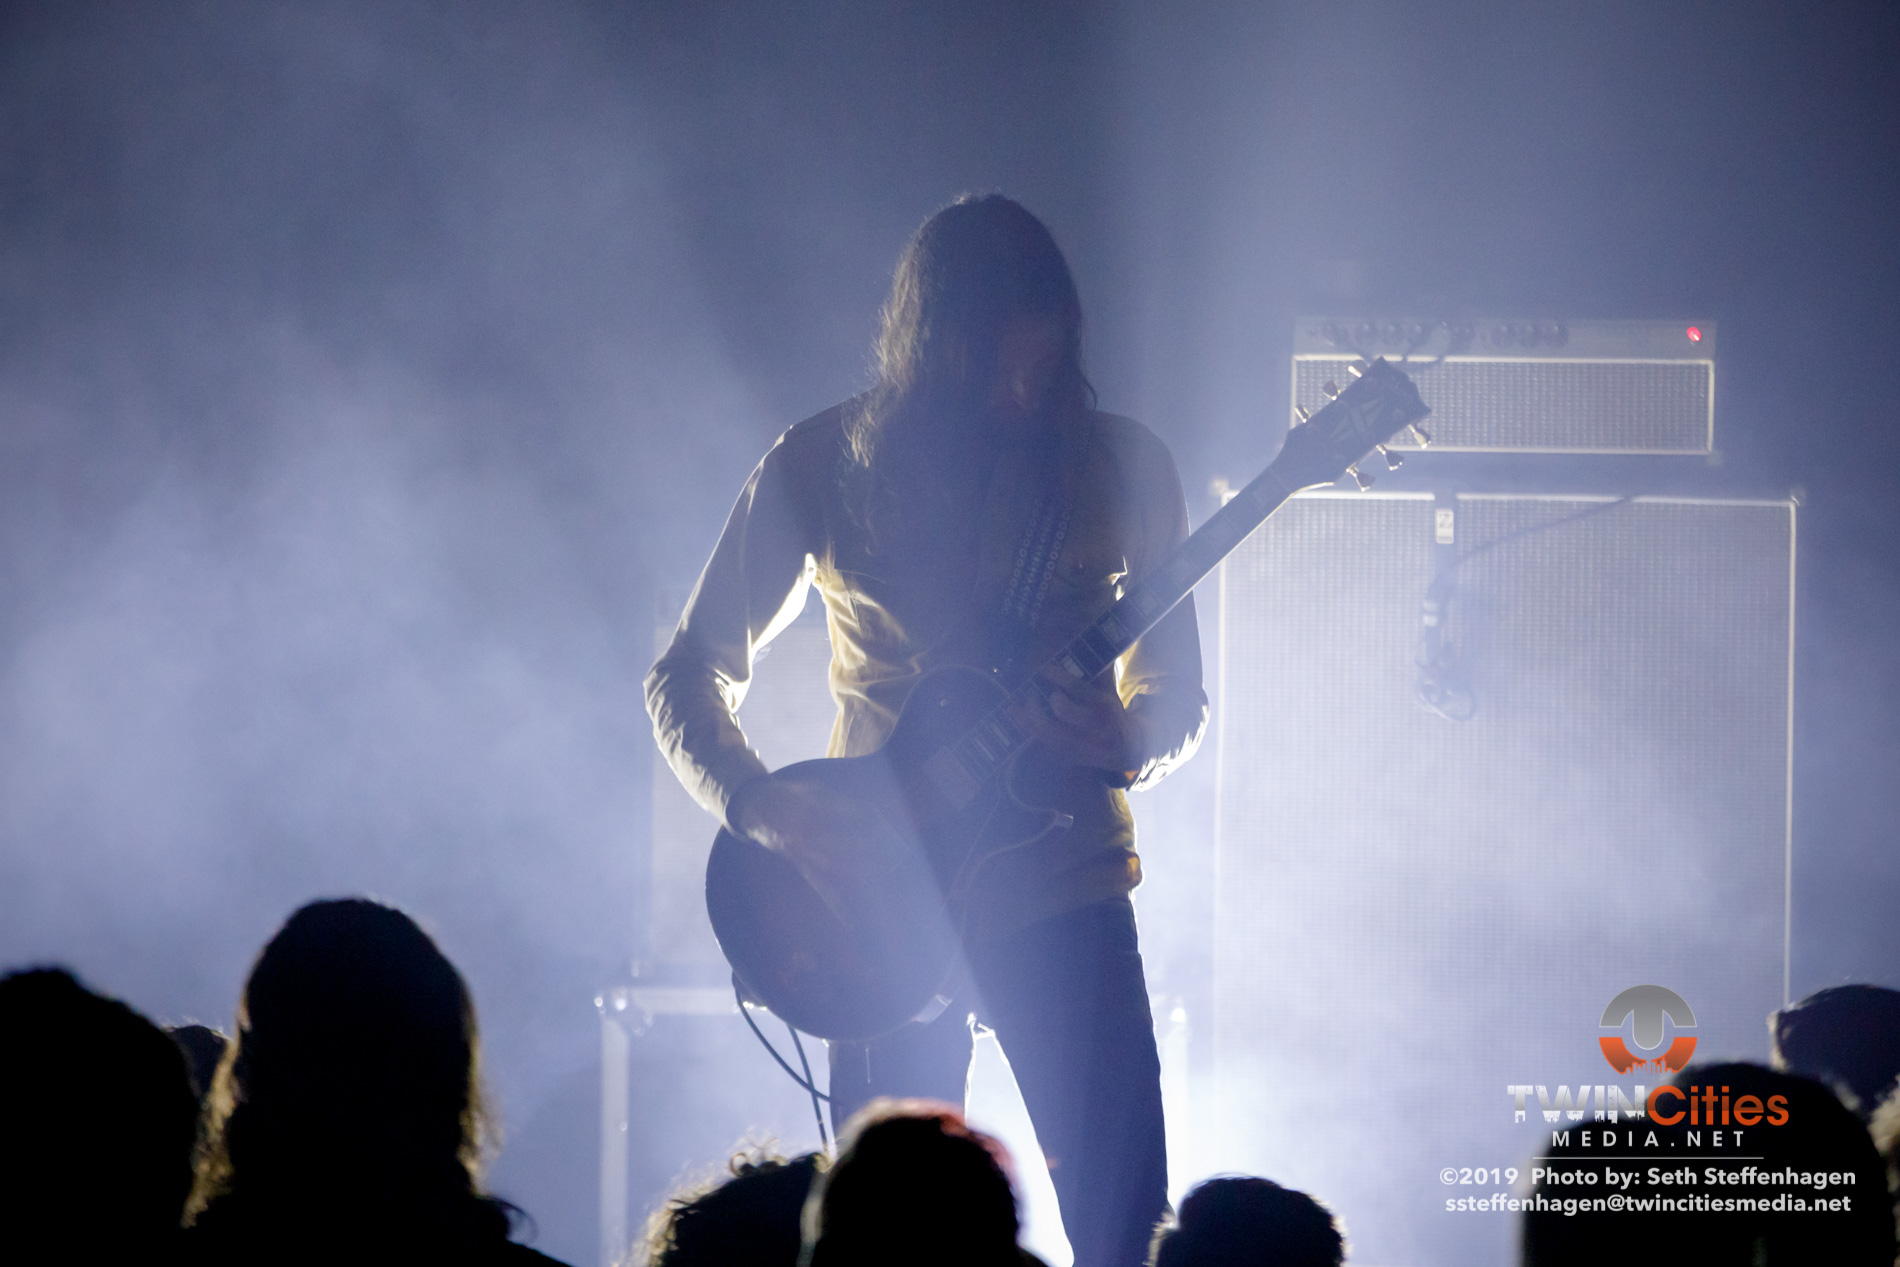 September 12, 2019 - Minneapolis, Minnesota, United States - Russian Circles live in concert at The Cedar Cultural Center along with FACS as the openers.

(Photo by Seth Steffenhagen/Steffenhagen Photography)